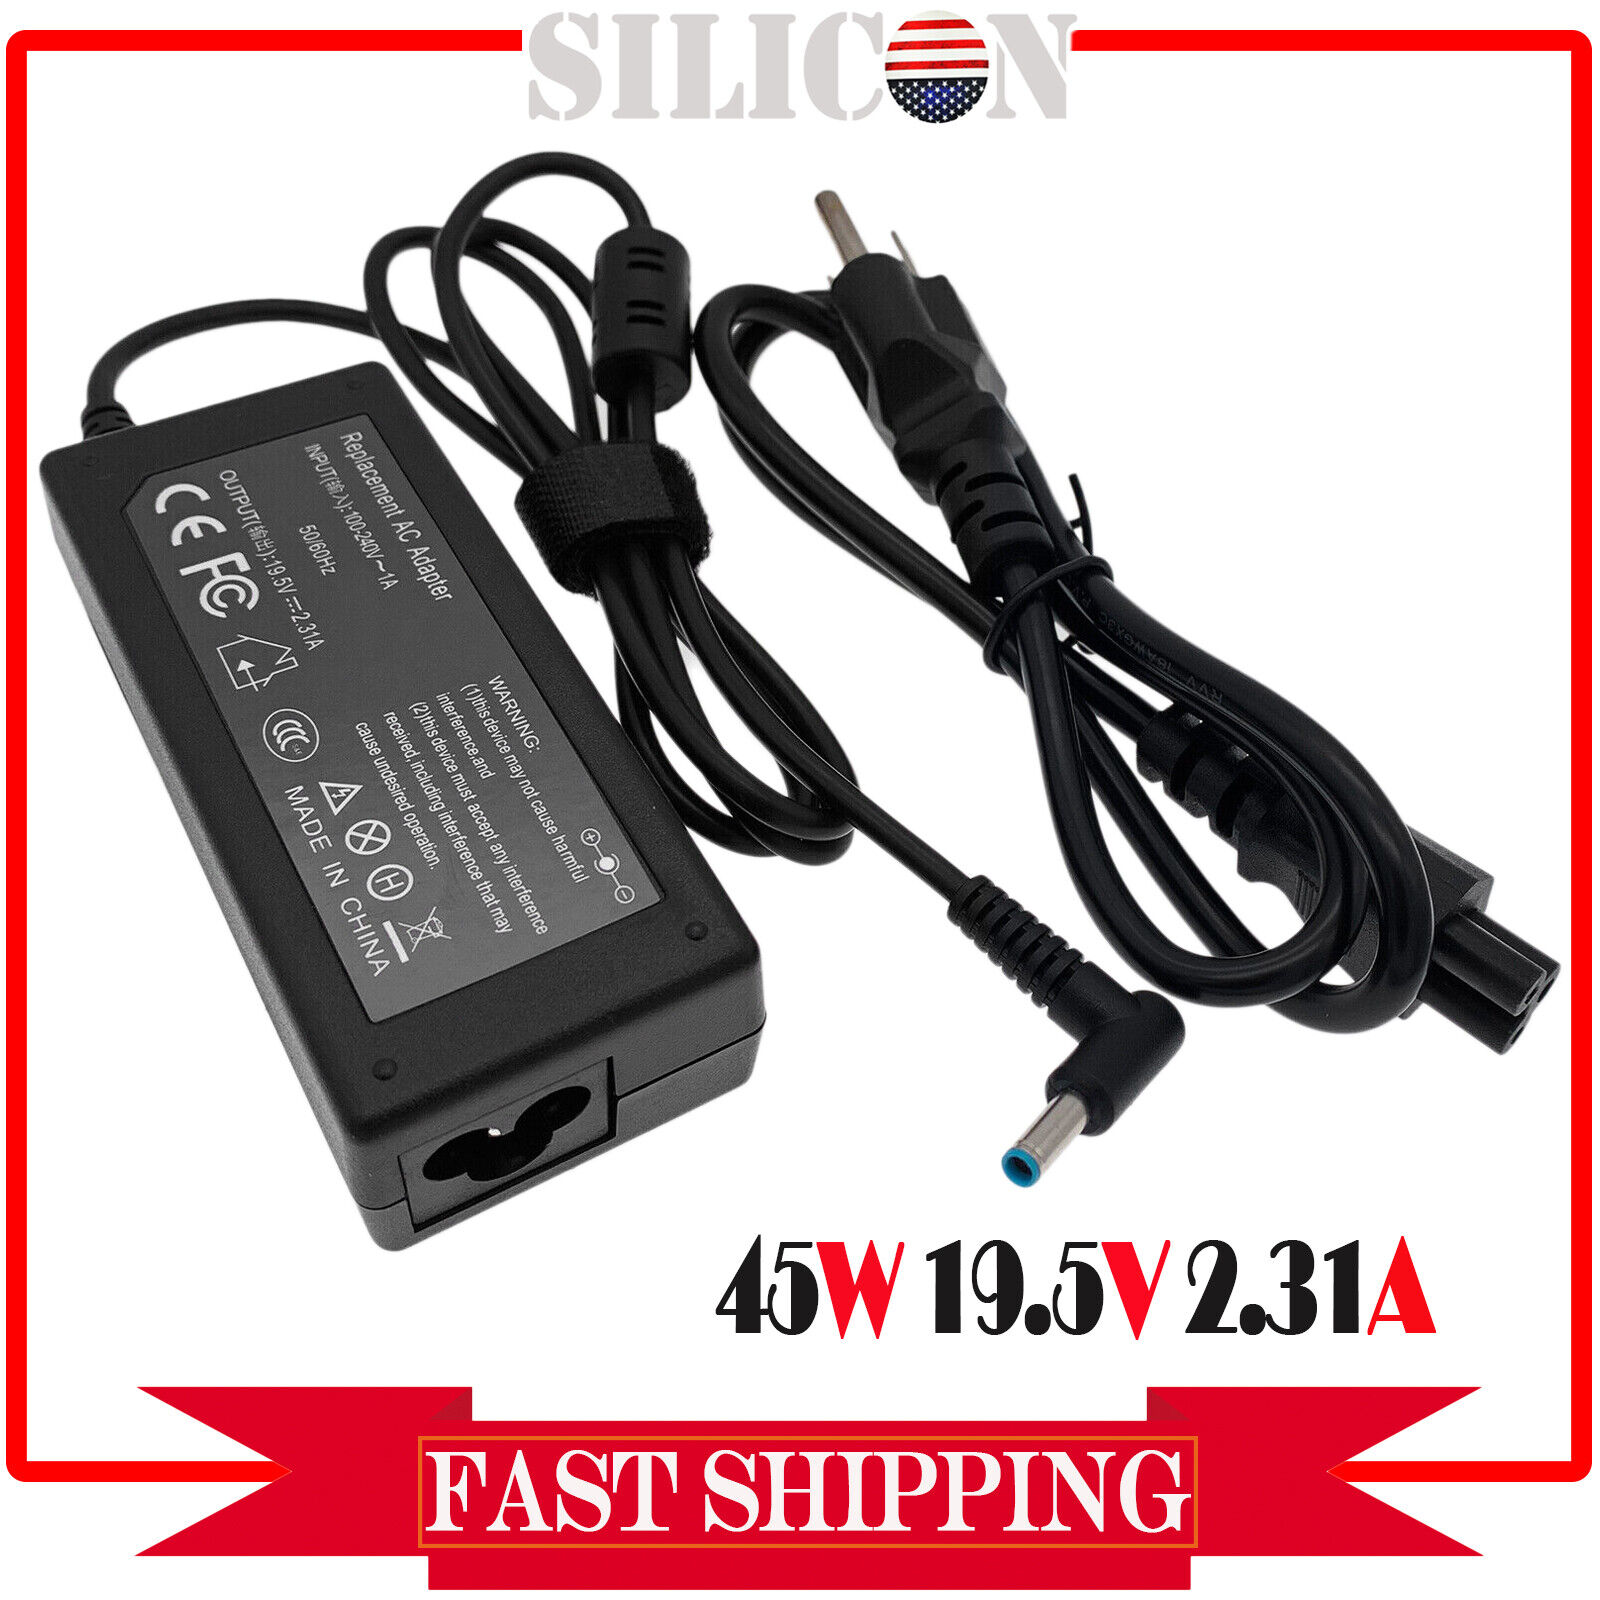 45W AC Adapter Charger Power Cord For HP 15-F100DX 15-F111DX 15-F162DX 15-F205DX